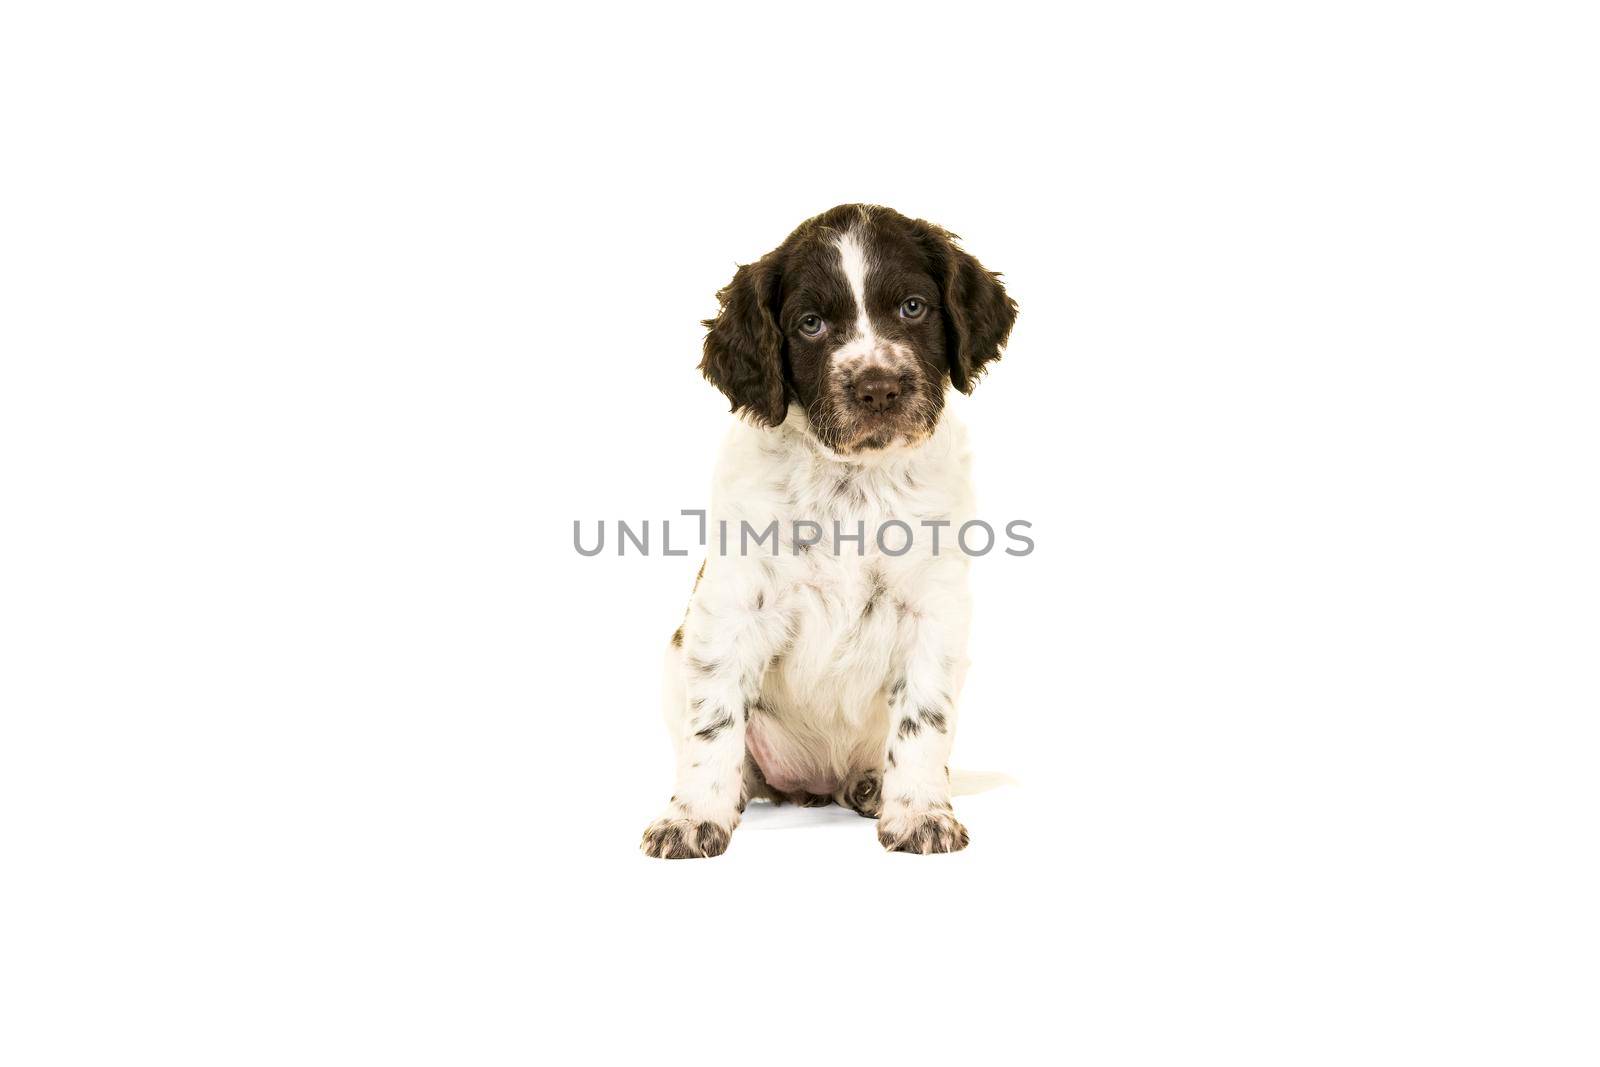 Cute Small Munsterlander Puppy sitting on isolated on a white background by LeoniekvanderVliet